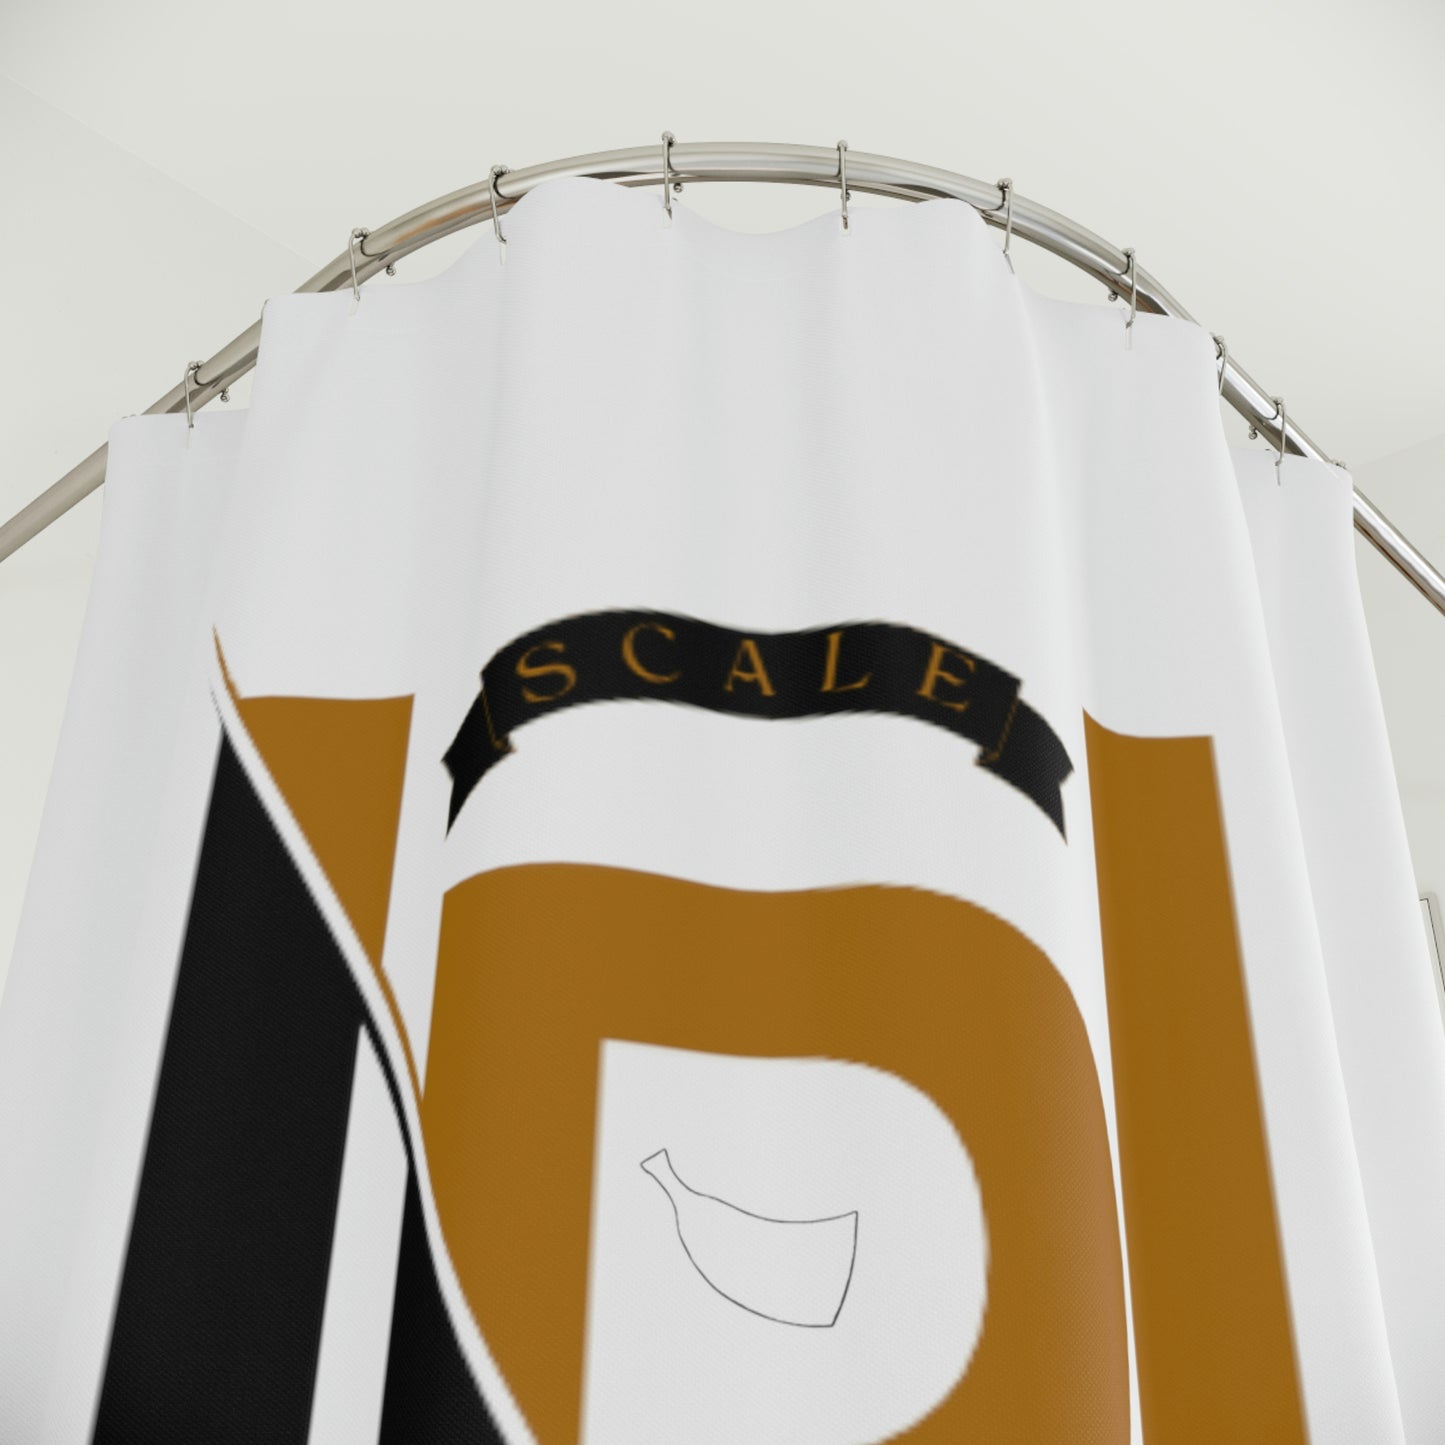 Upscale Shower Curtain